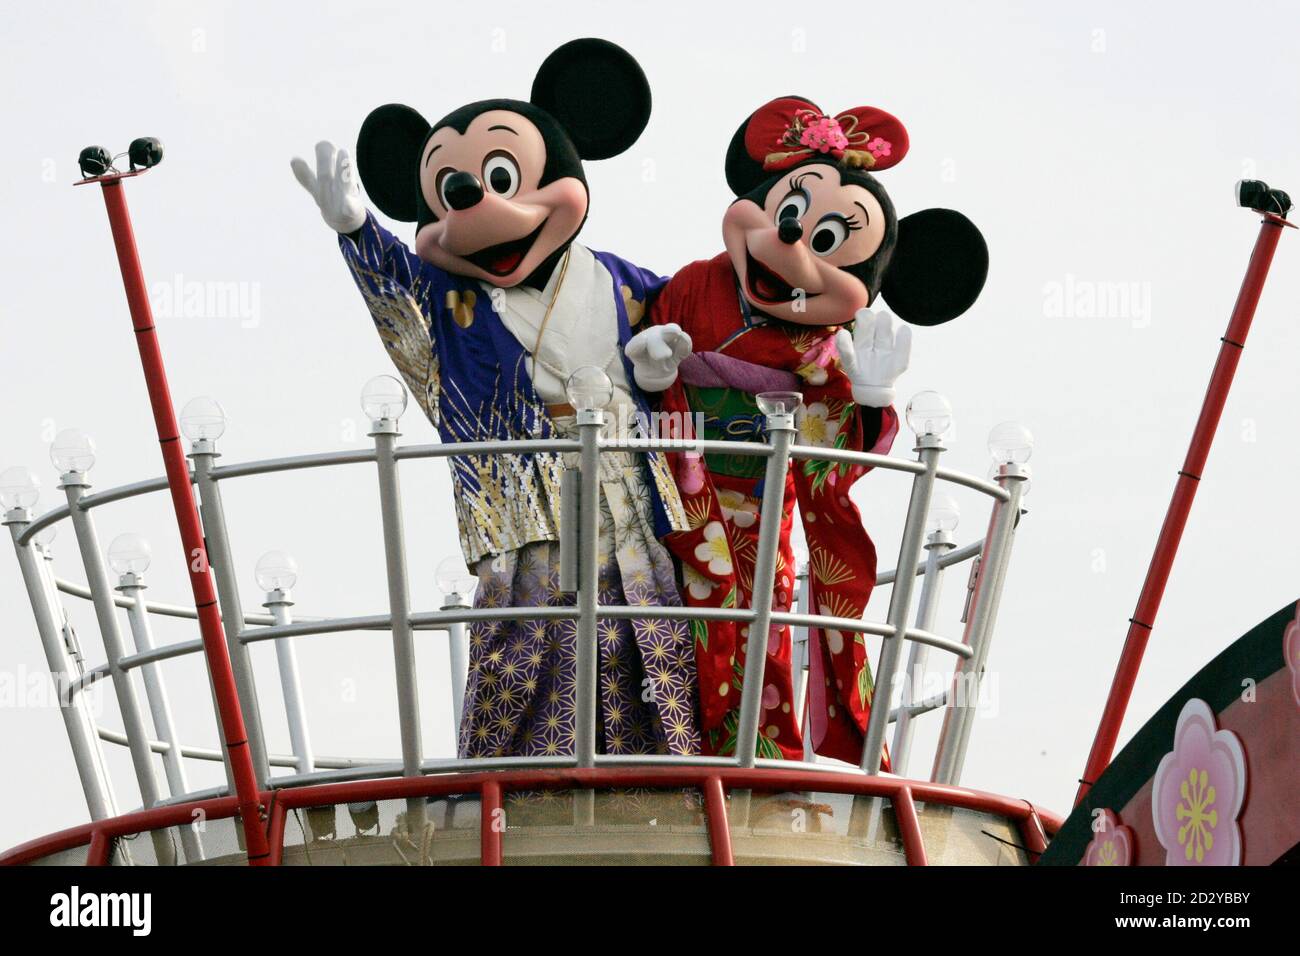 Disney cartoon characters Mickey (L) and Minnie Mouse, dressed in kimonos,  wave atop a float during New Year celebrations at Tokyo Disneyland in  Urayasu, east of Tokyo, January 1, 2007. REUTERS/Issei Kato (